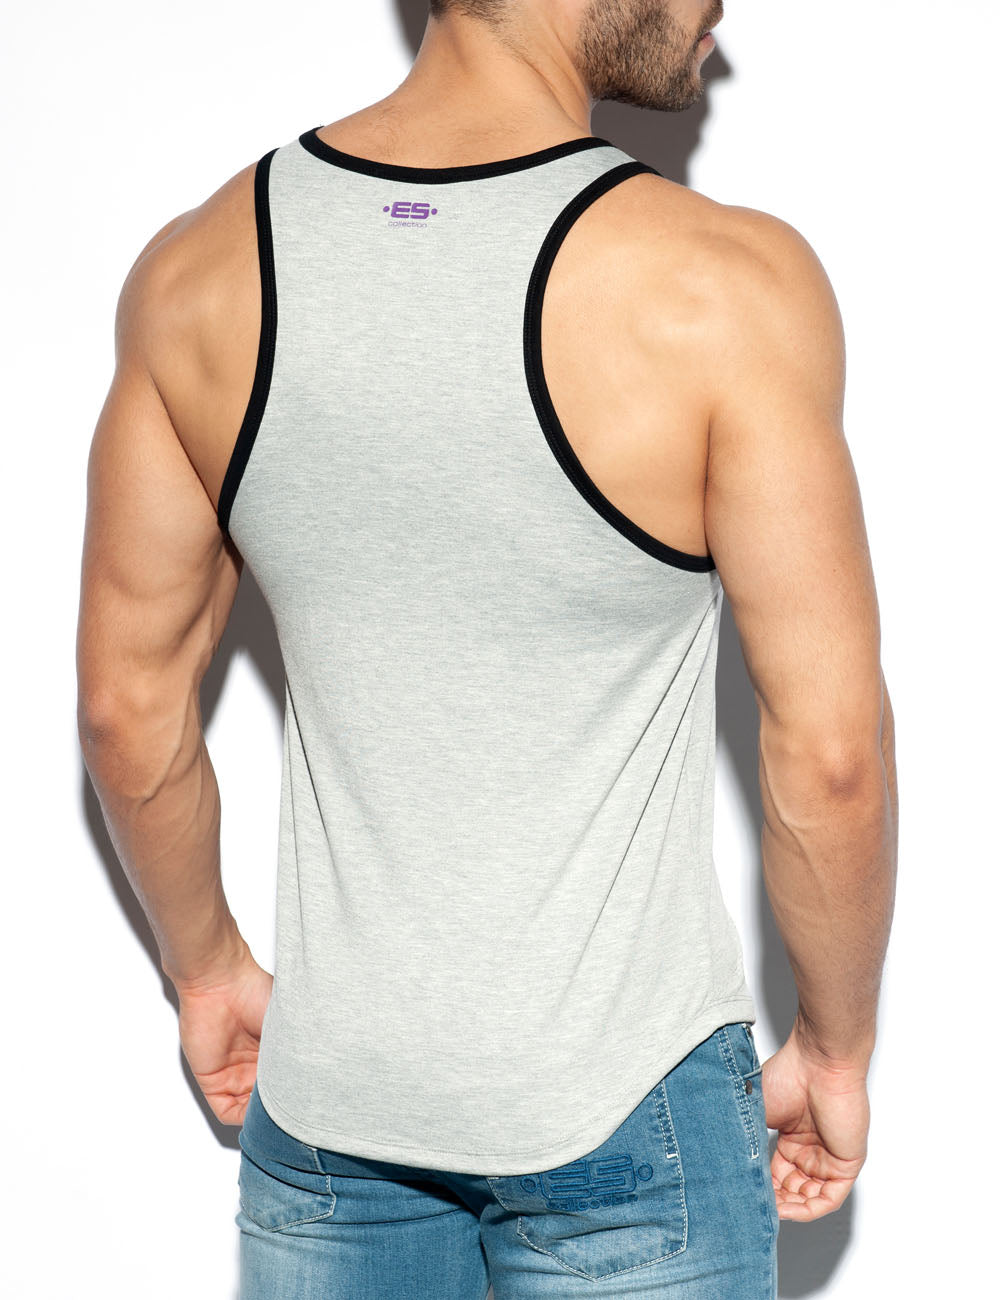 ES Collection Identity Mesh Tank Top